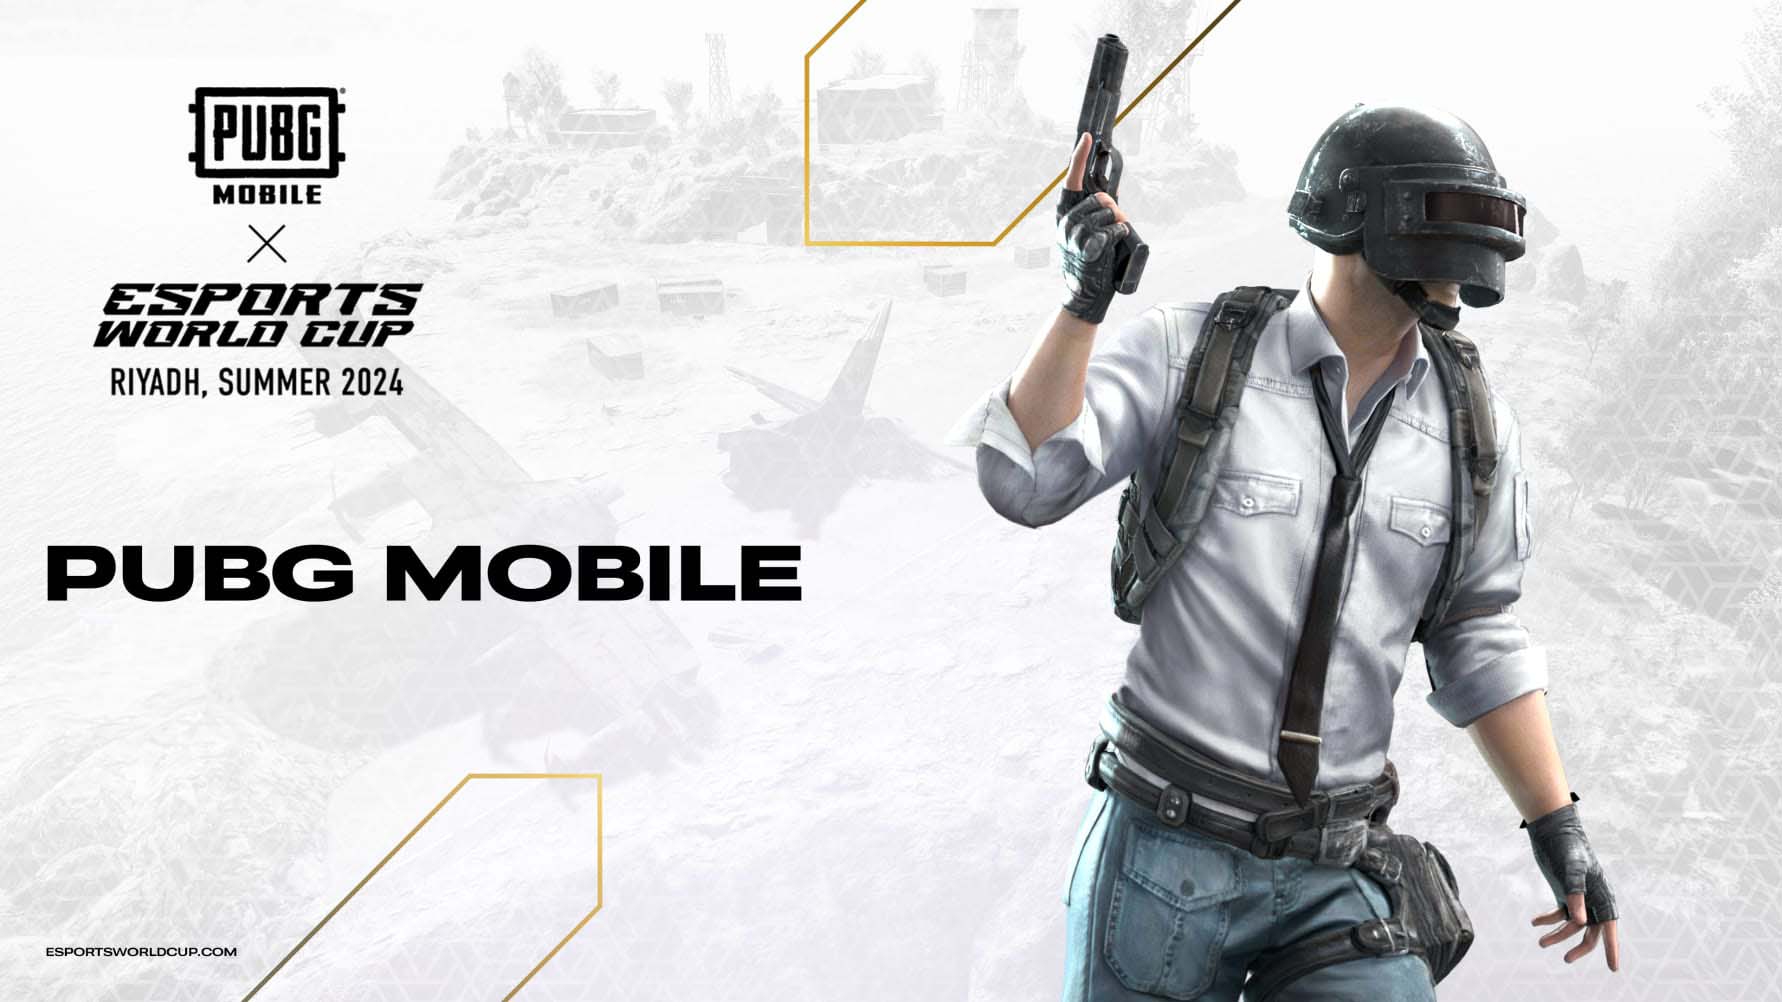 PUBG Mobile World Cup announced for Esports World Cup